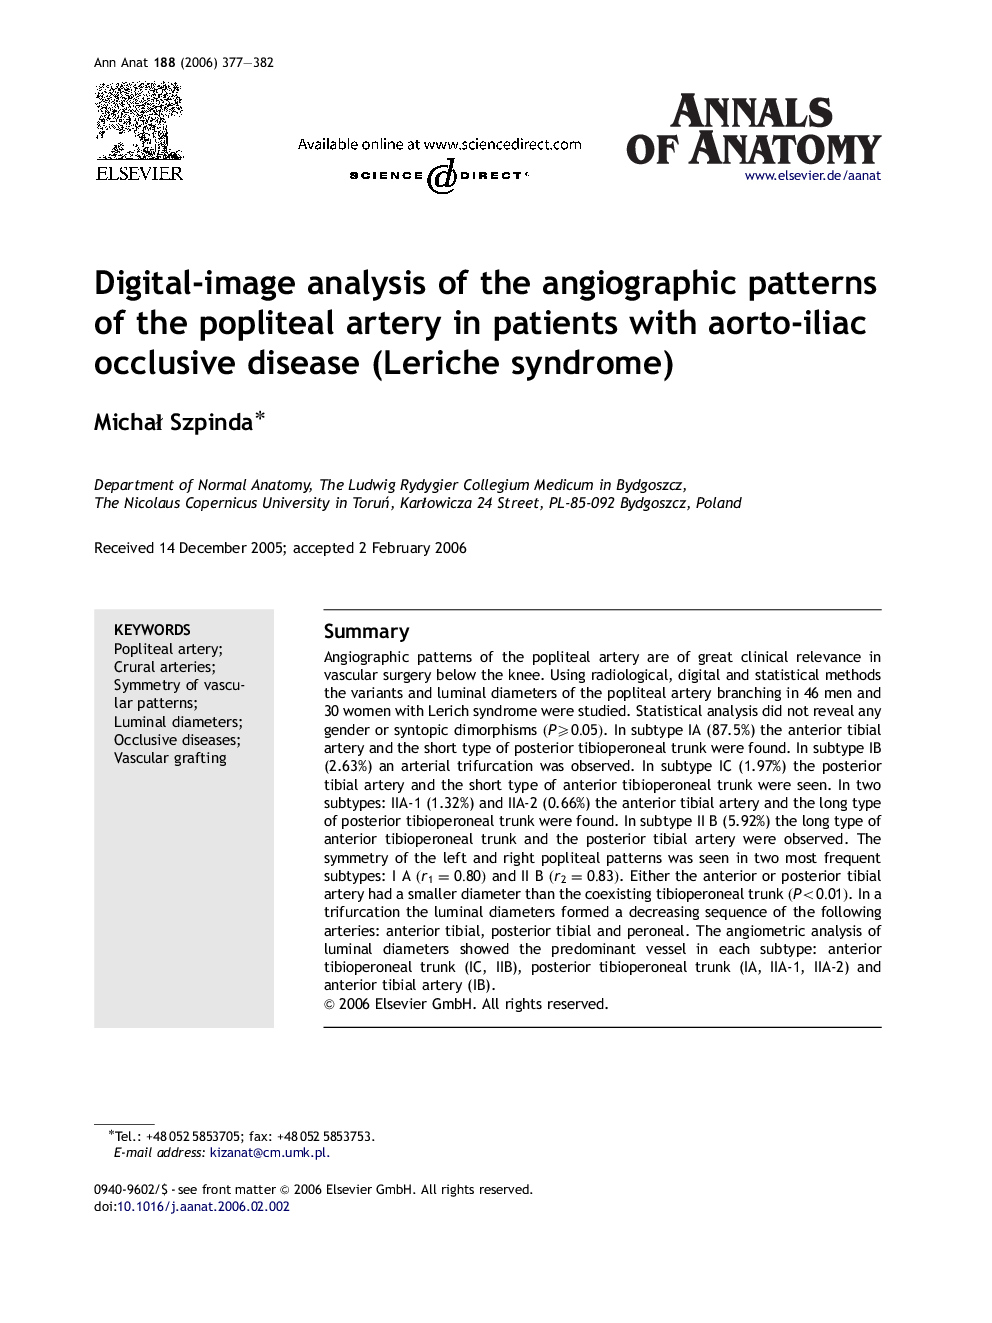 Digital-image analysis of the angiographic patterns of the popliteal artery in patients with aorto-iliac occlusive disease (Leriche syndrome)